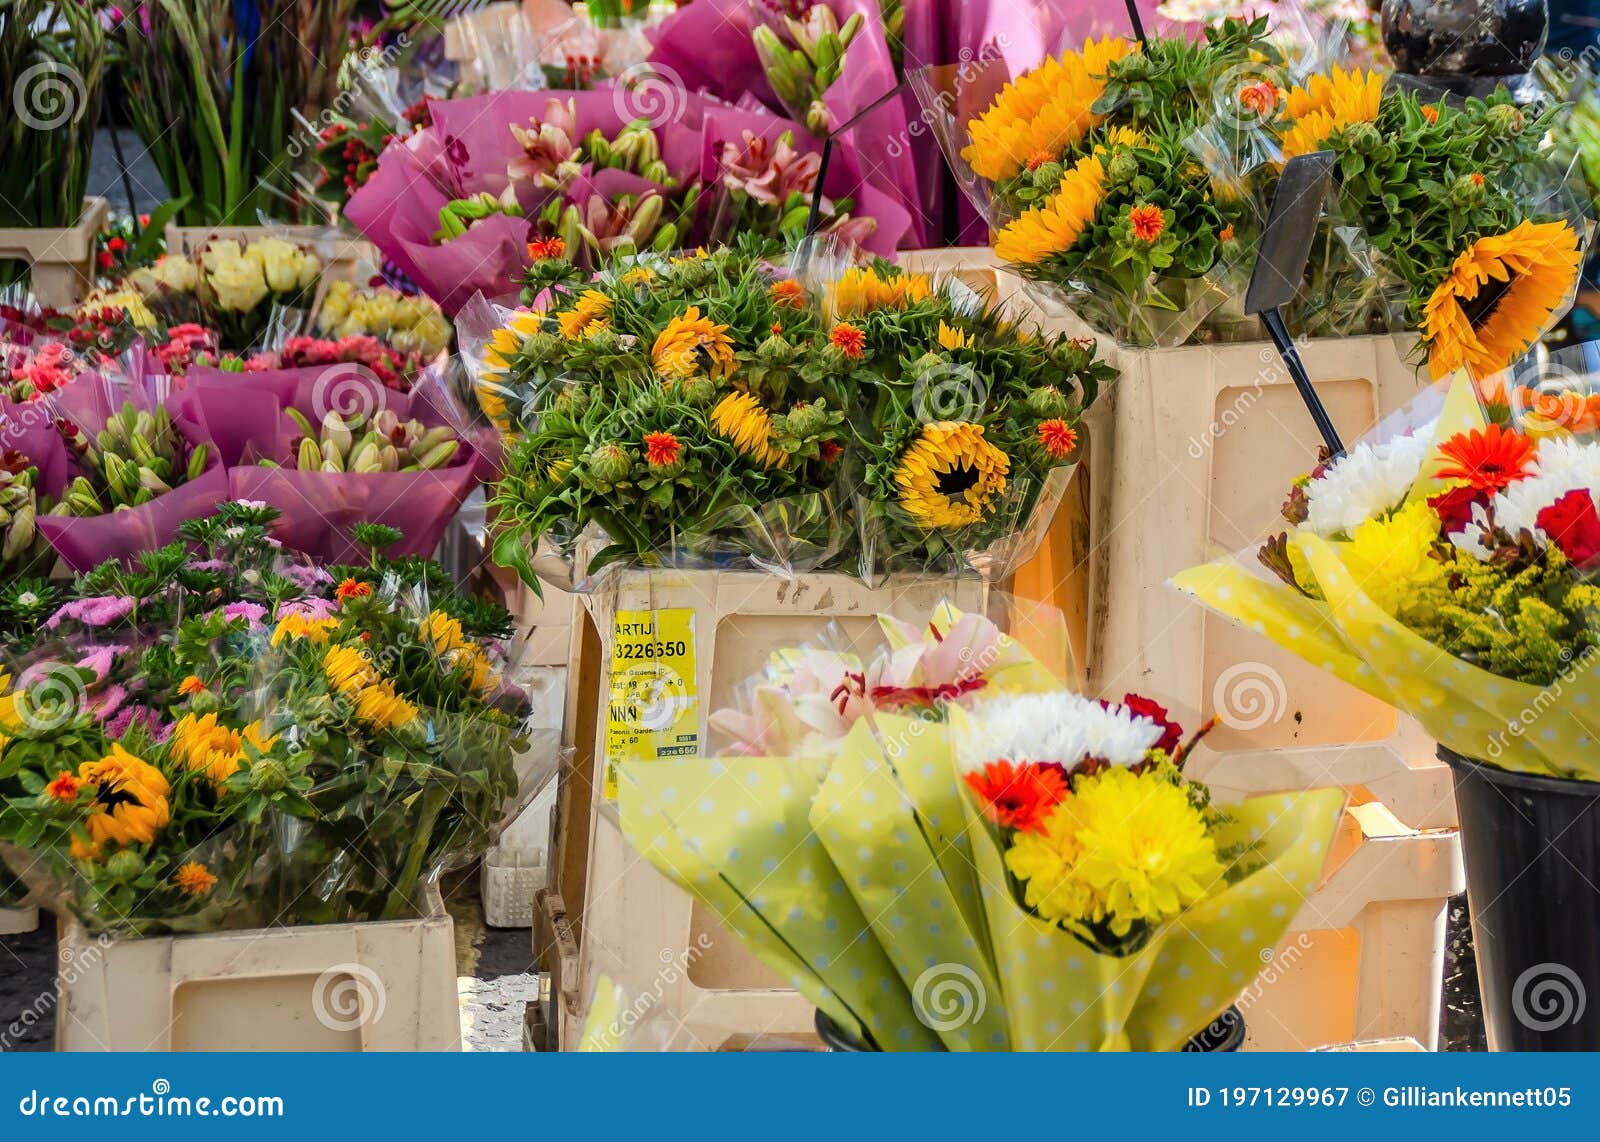 Flower Bouquets Fro Sale on Street Market Stock Image - Image of ...